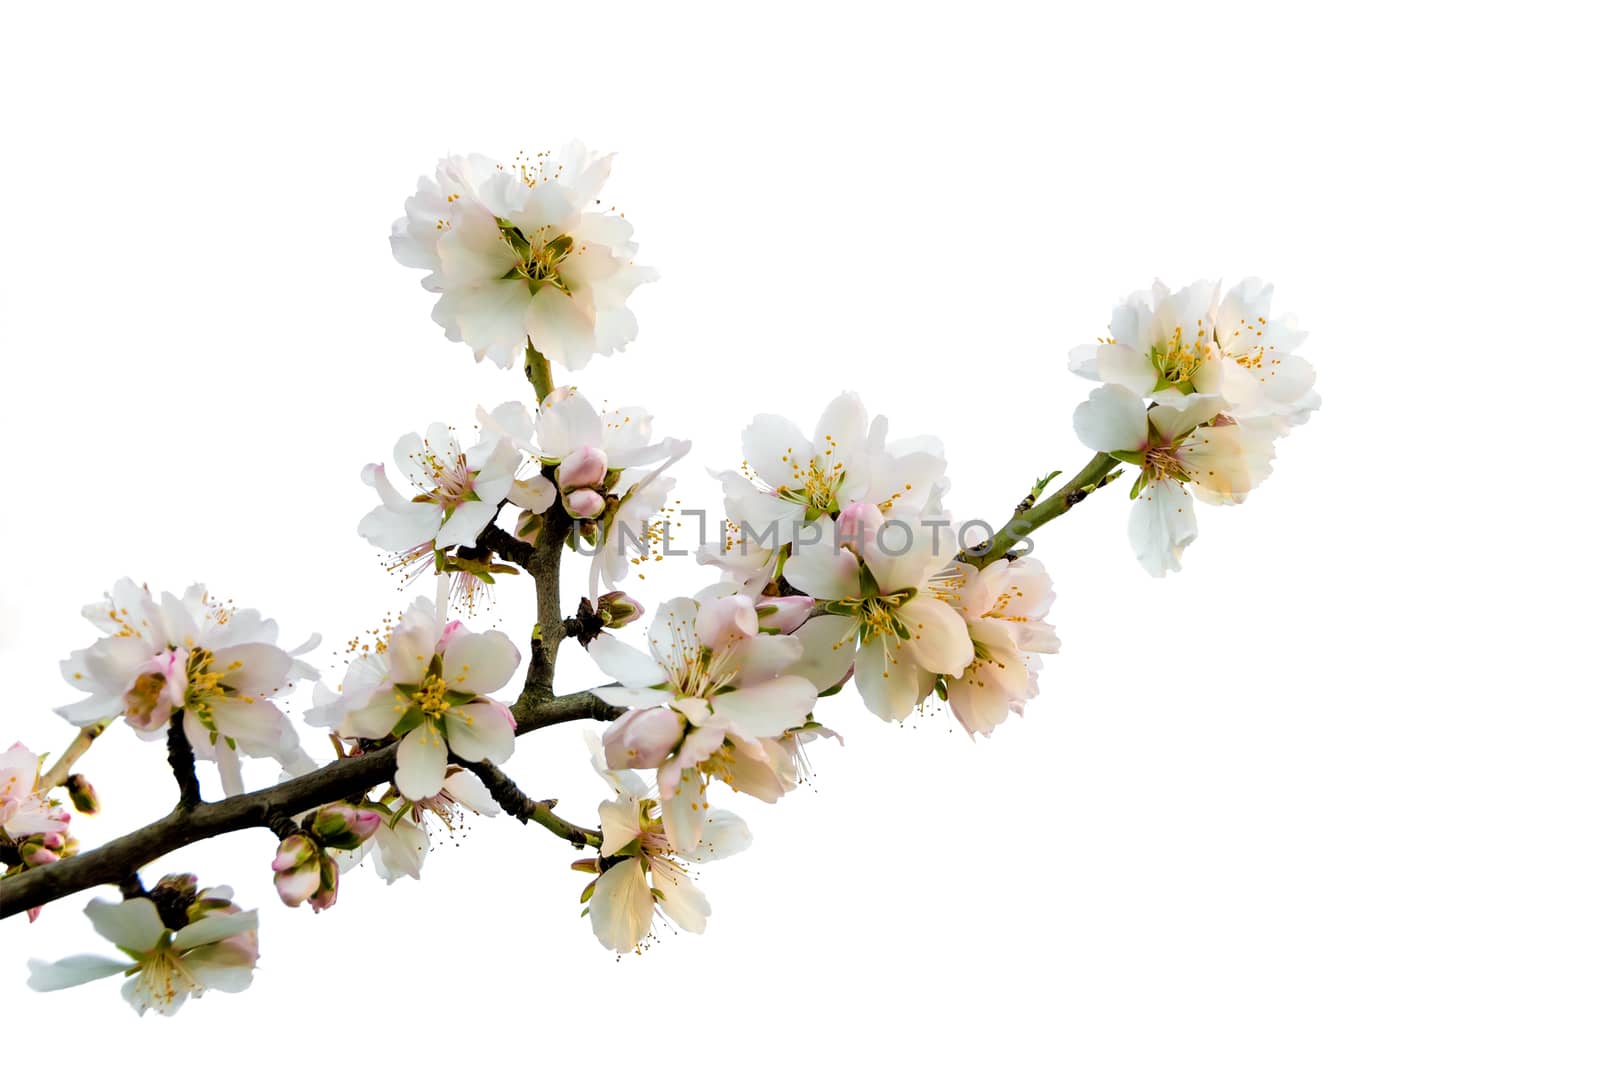 Almond branch, Prunus dulcis, in bloom isolated over white background.